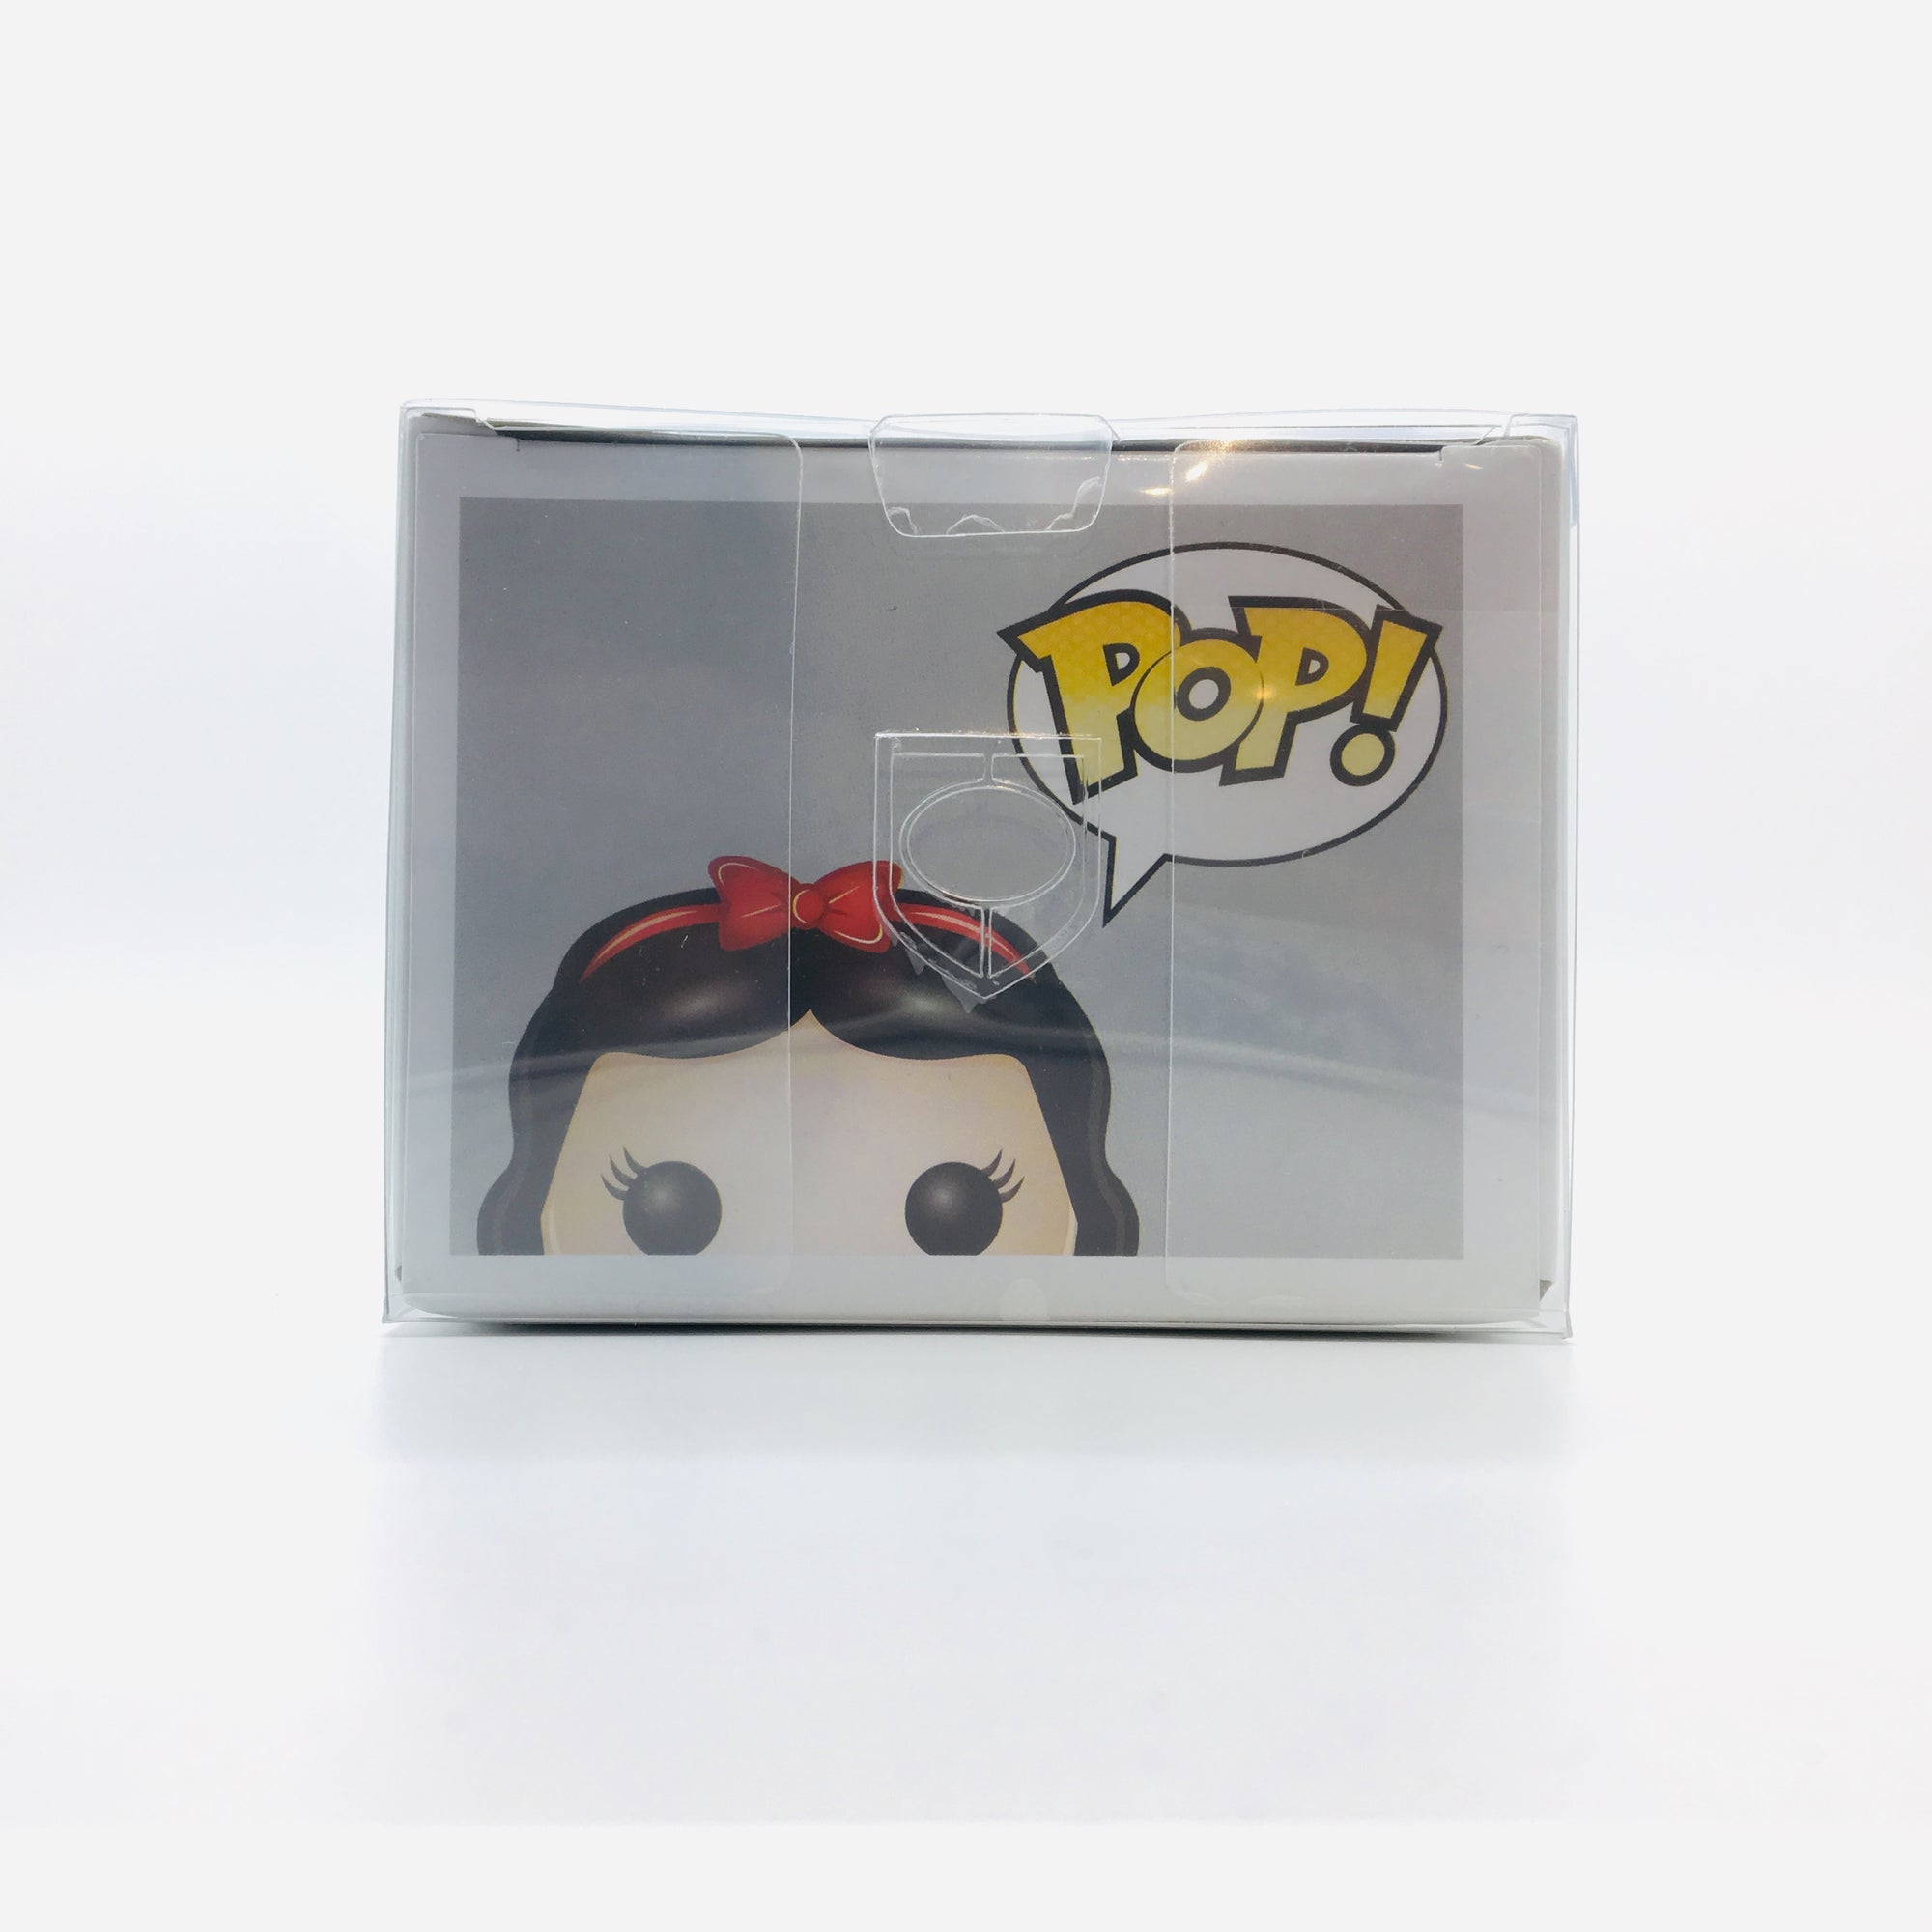 Disney Snow White Pop Toy Figure #08 Vaulted by Funko